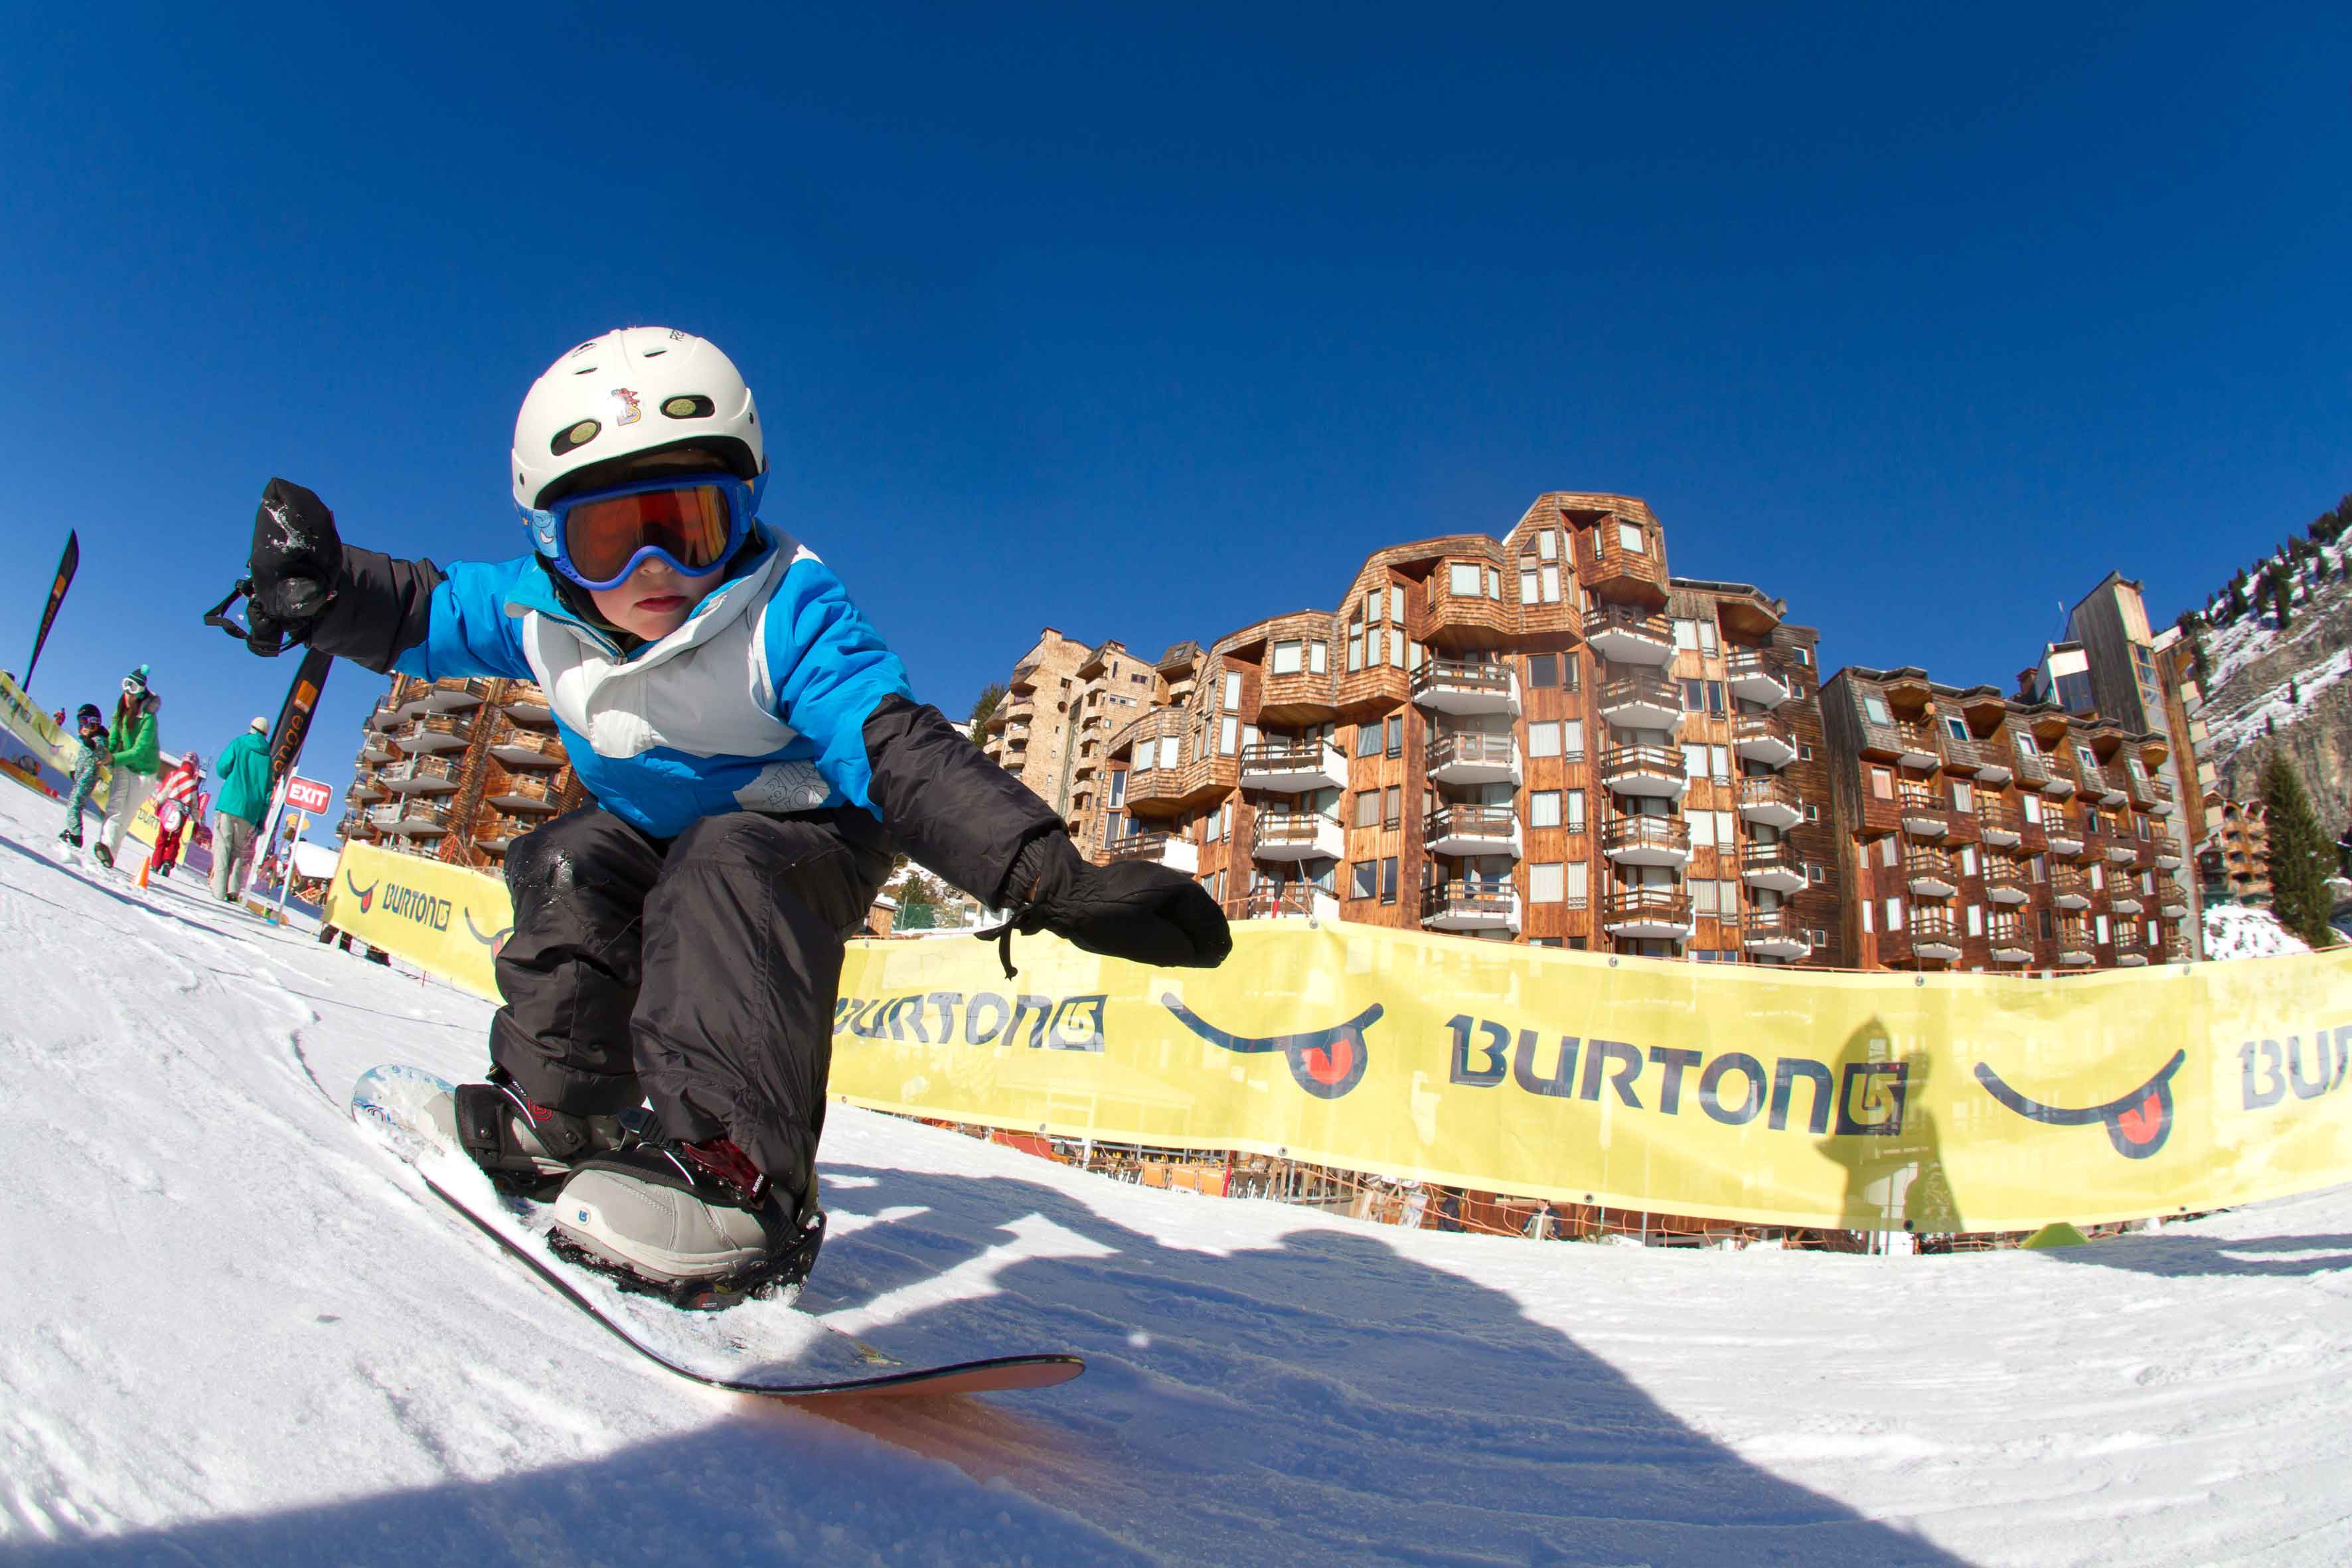 Learning to snowboard in family friendly Avoriaz